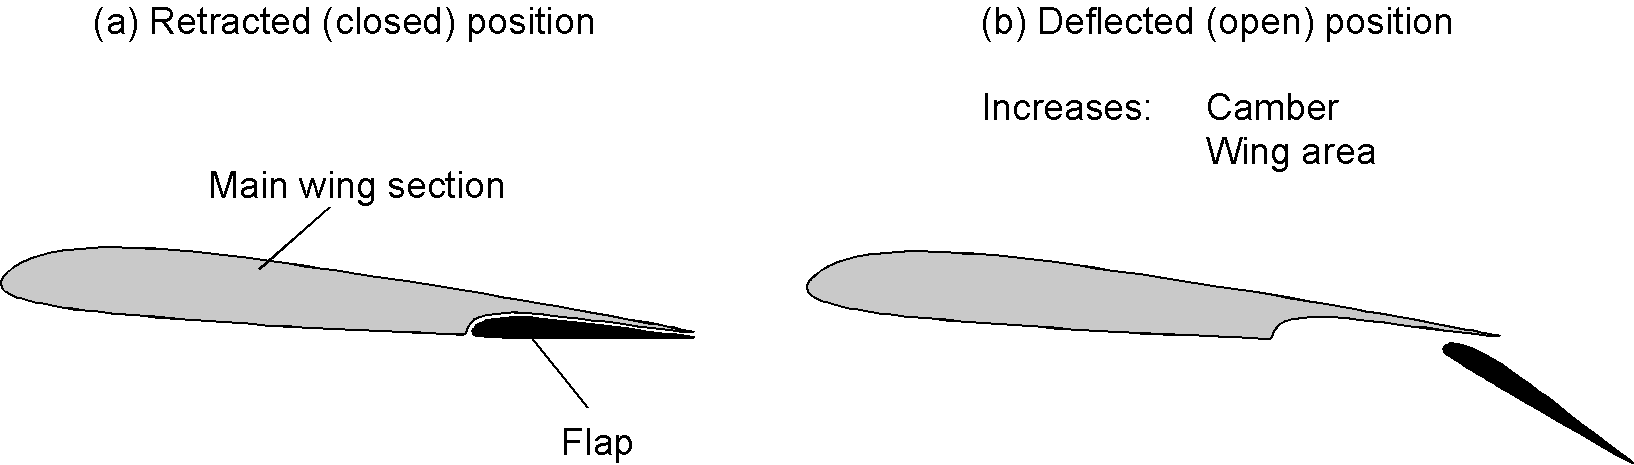 Diagrams of a side-view of a wing with flap closed versus flap open.